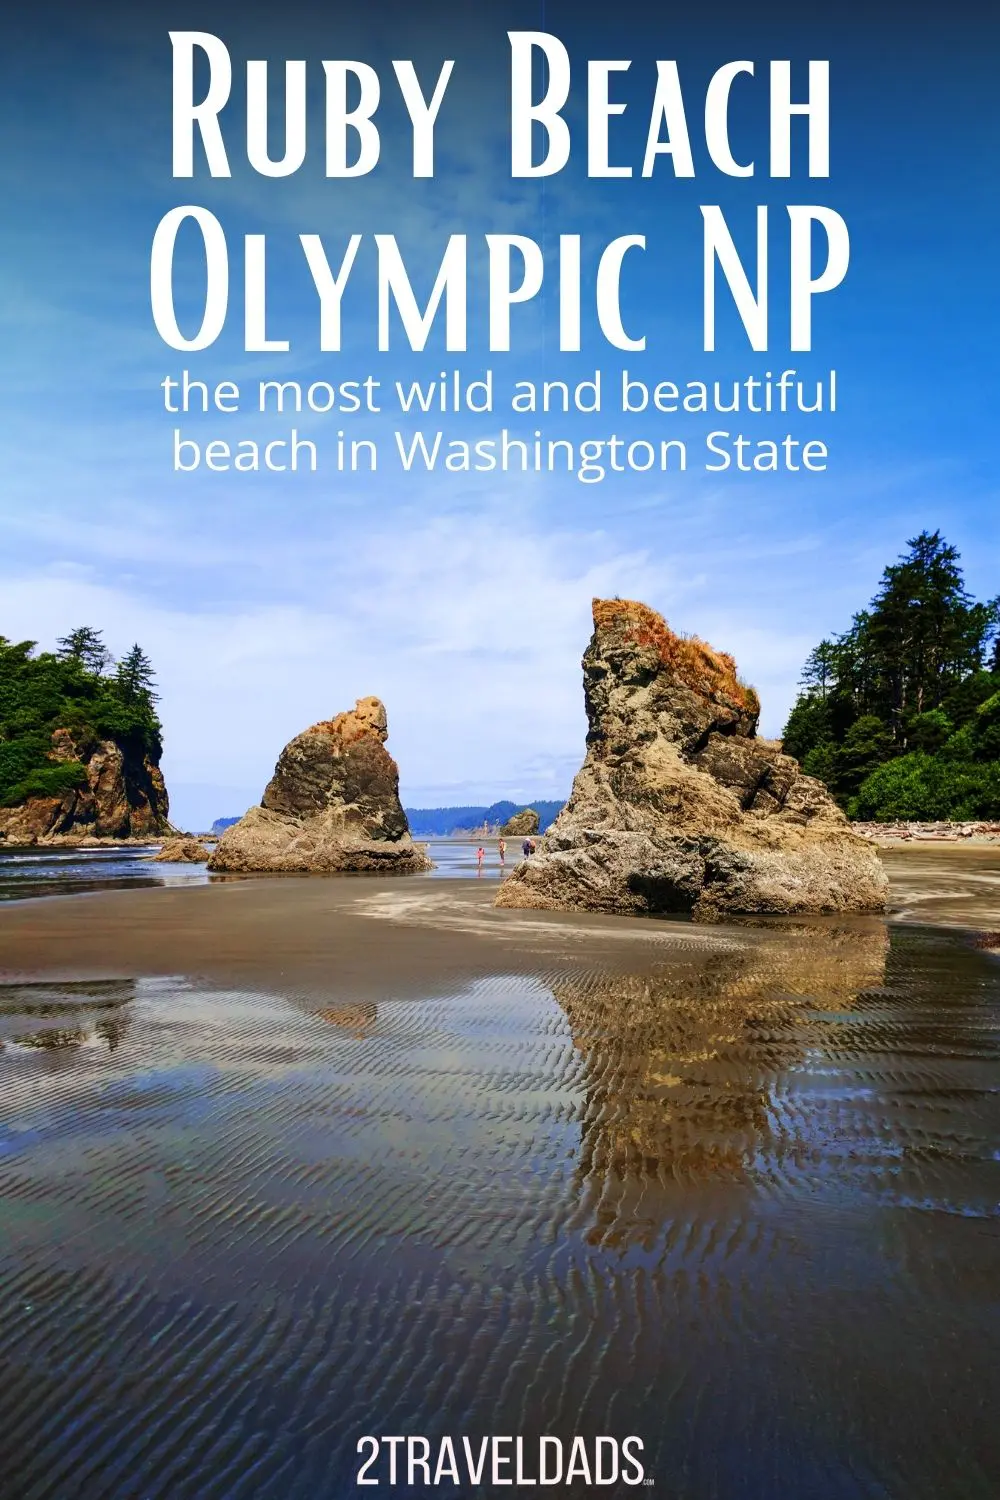 Everything you need to know about Ruby Beach in Olympic National Park, from how to get there to wildlife to watch for.